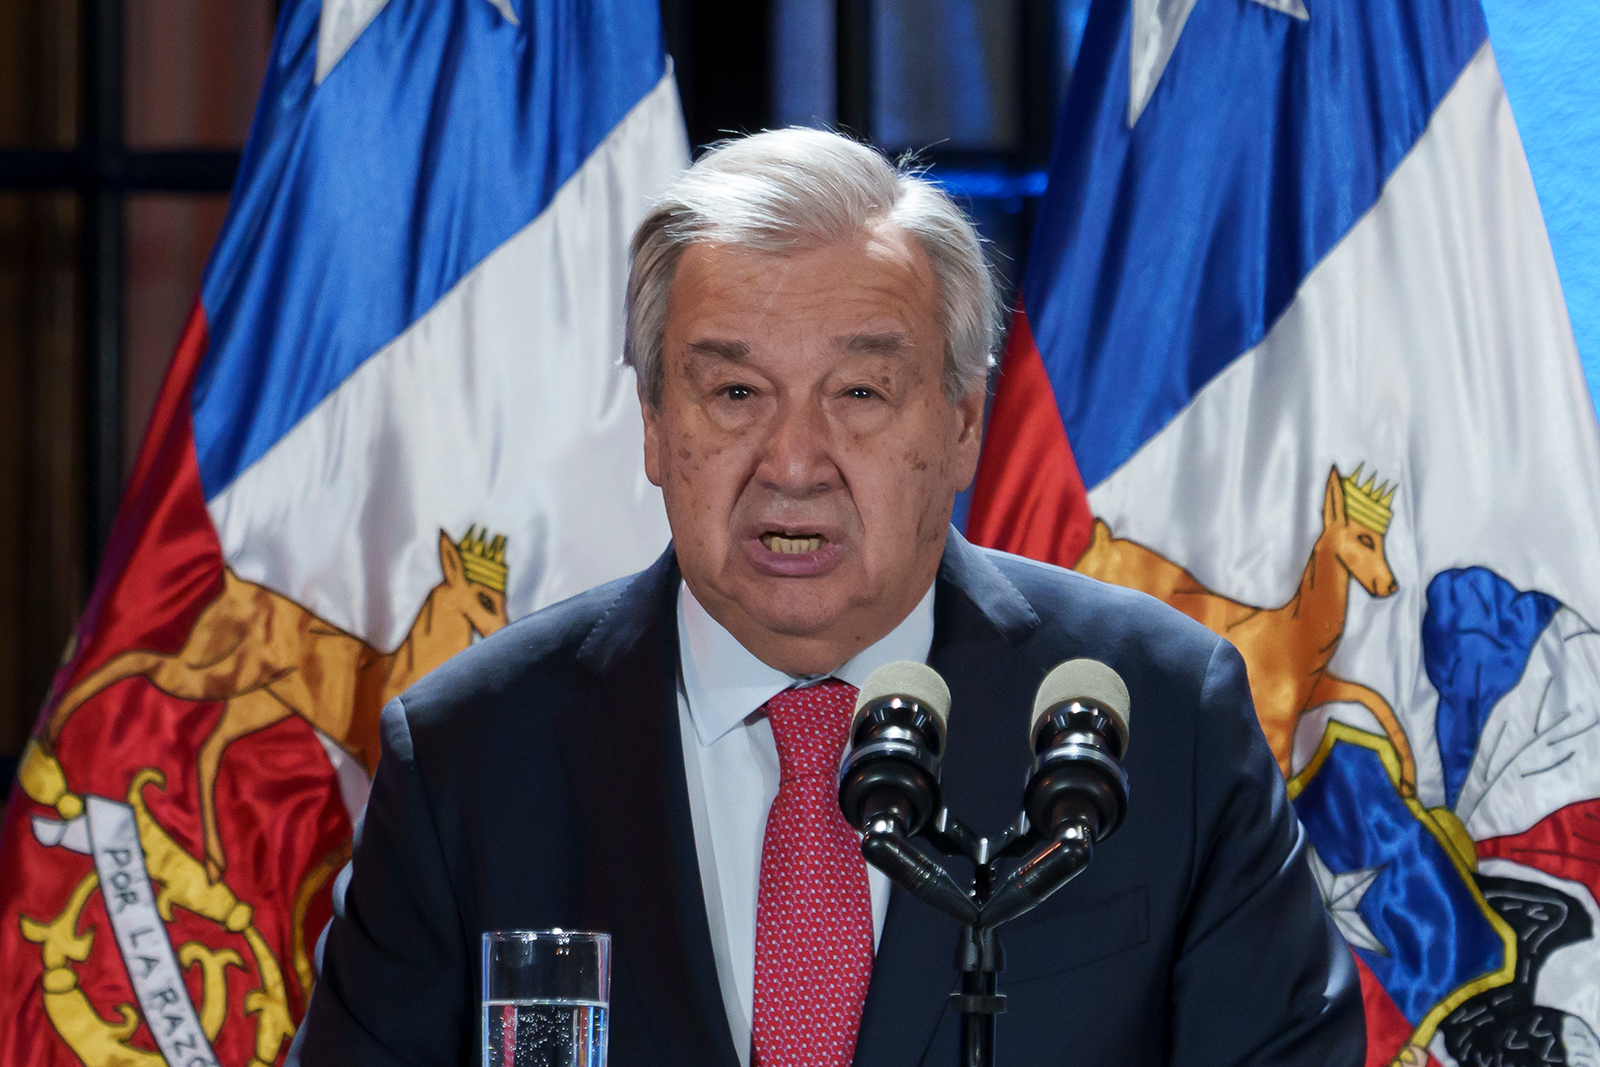 António Guterres speaks to the press in Santiago, Chile on May 2.